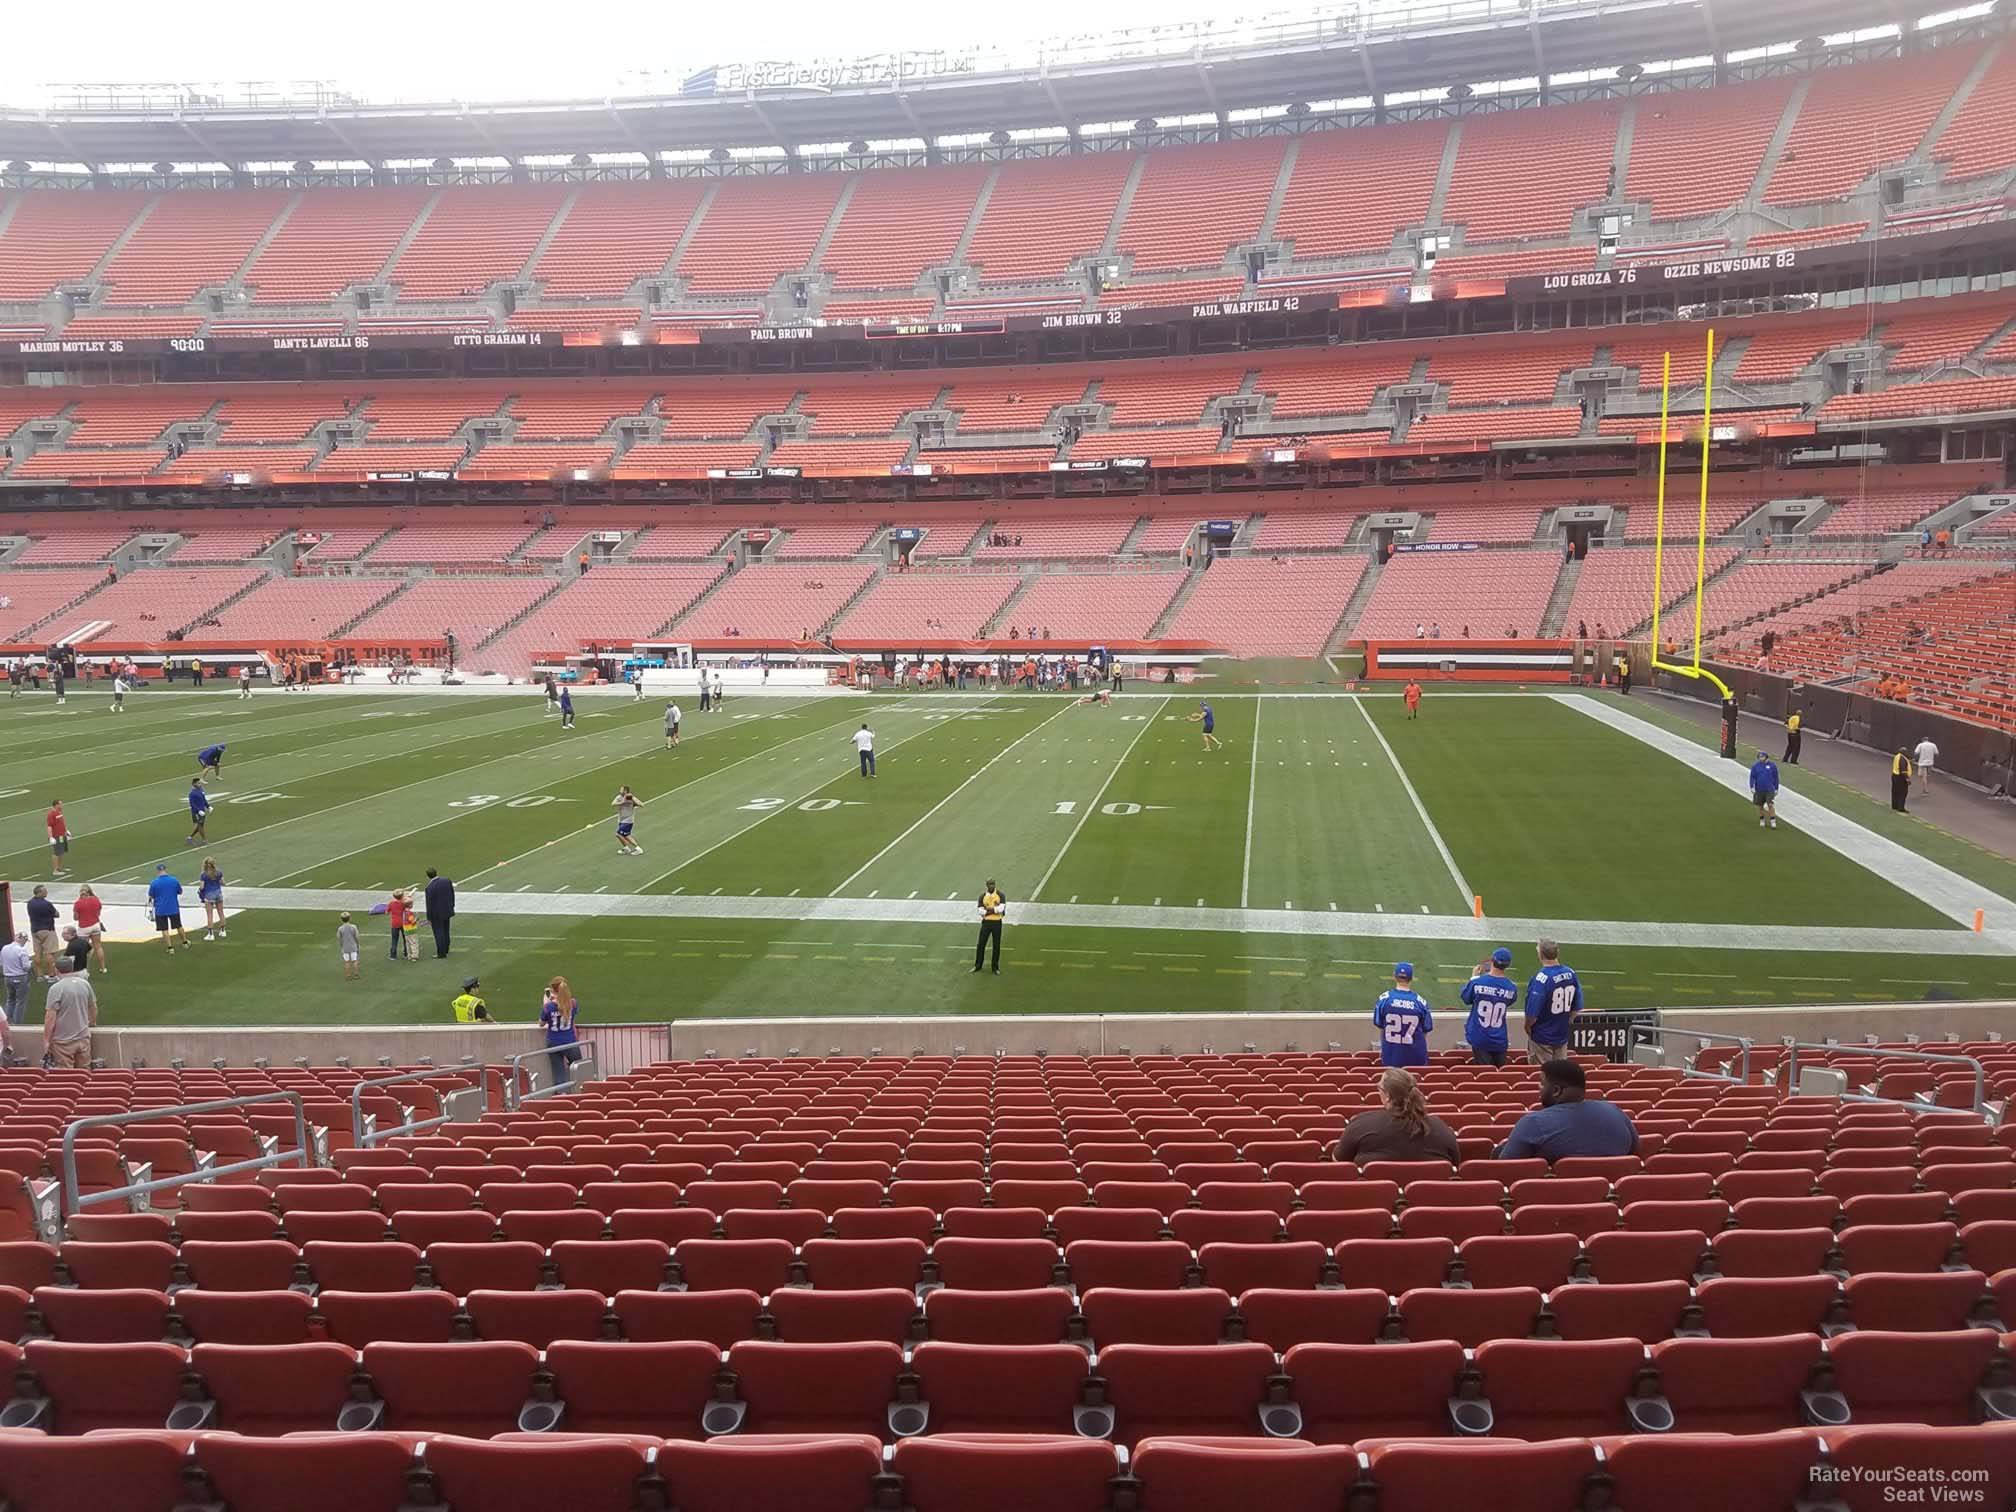 section 112, row 22 seat view  - cleveland browns stadium